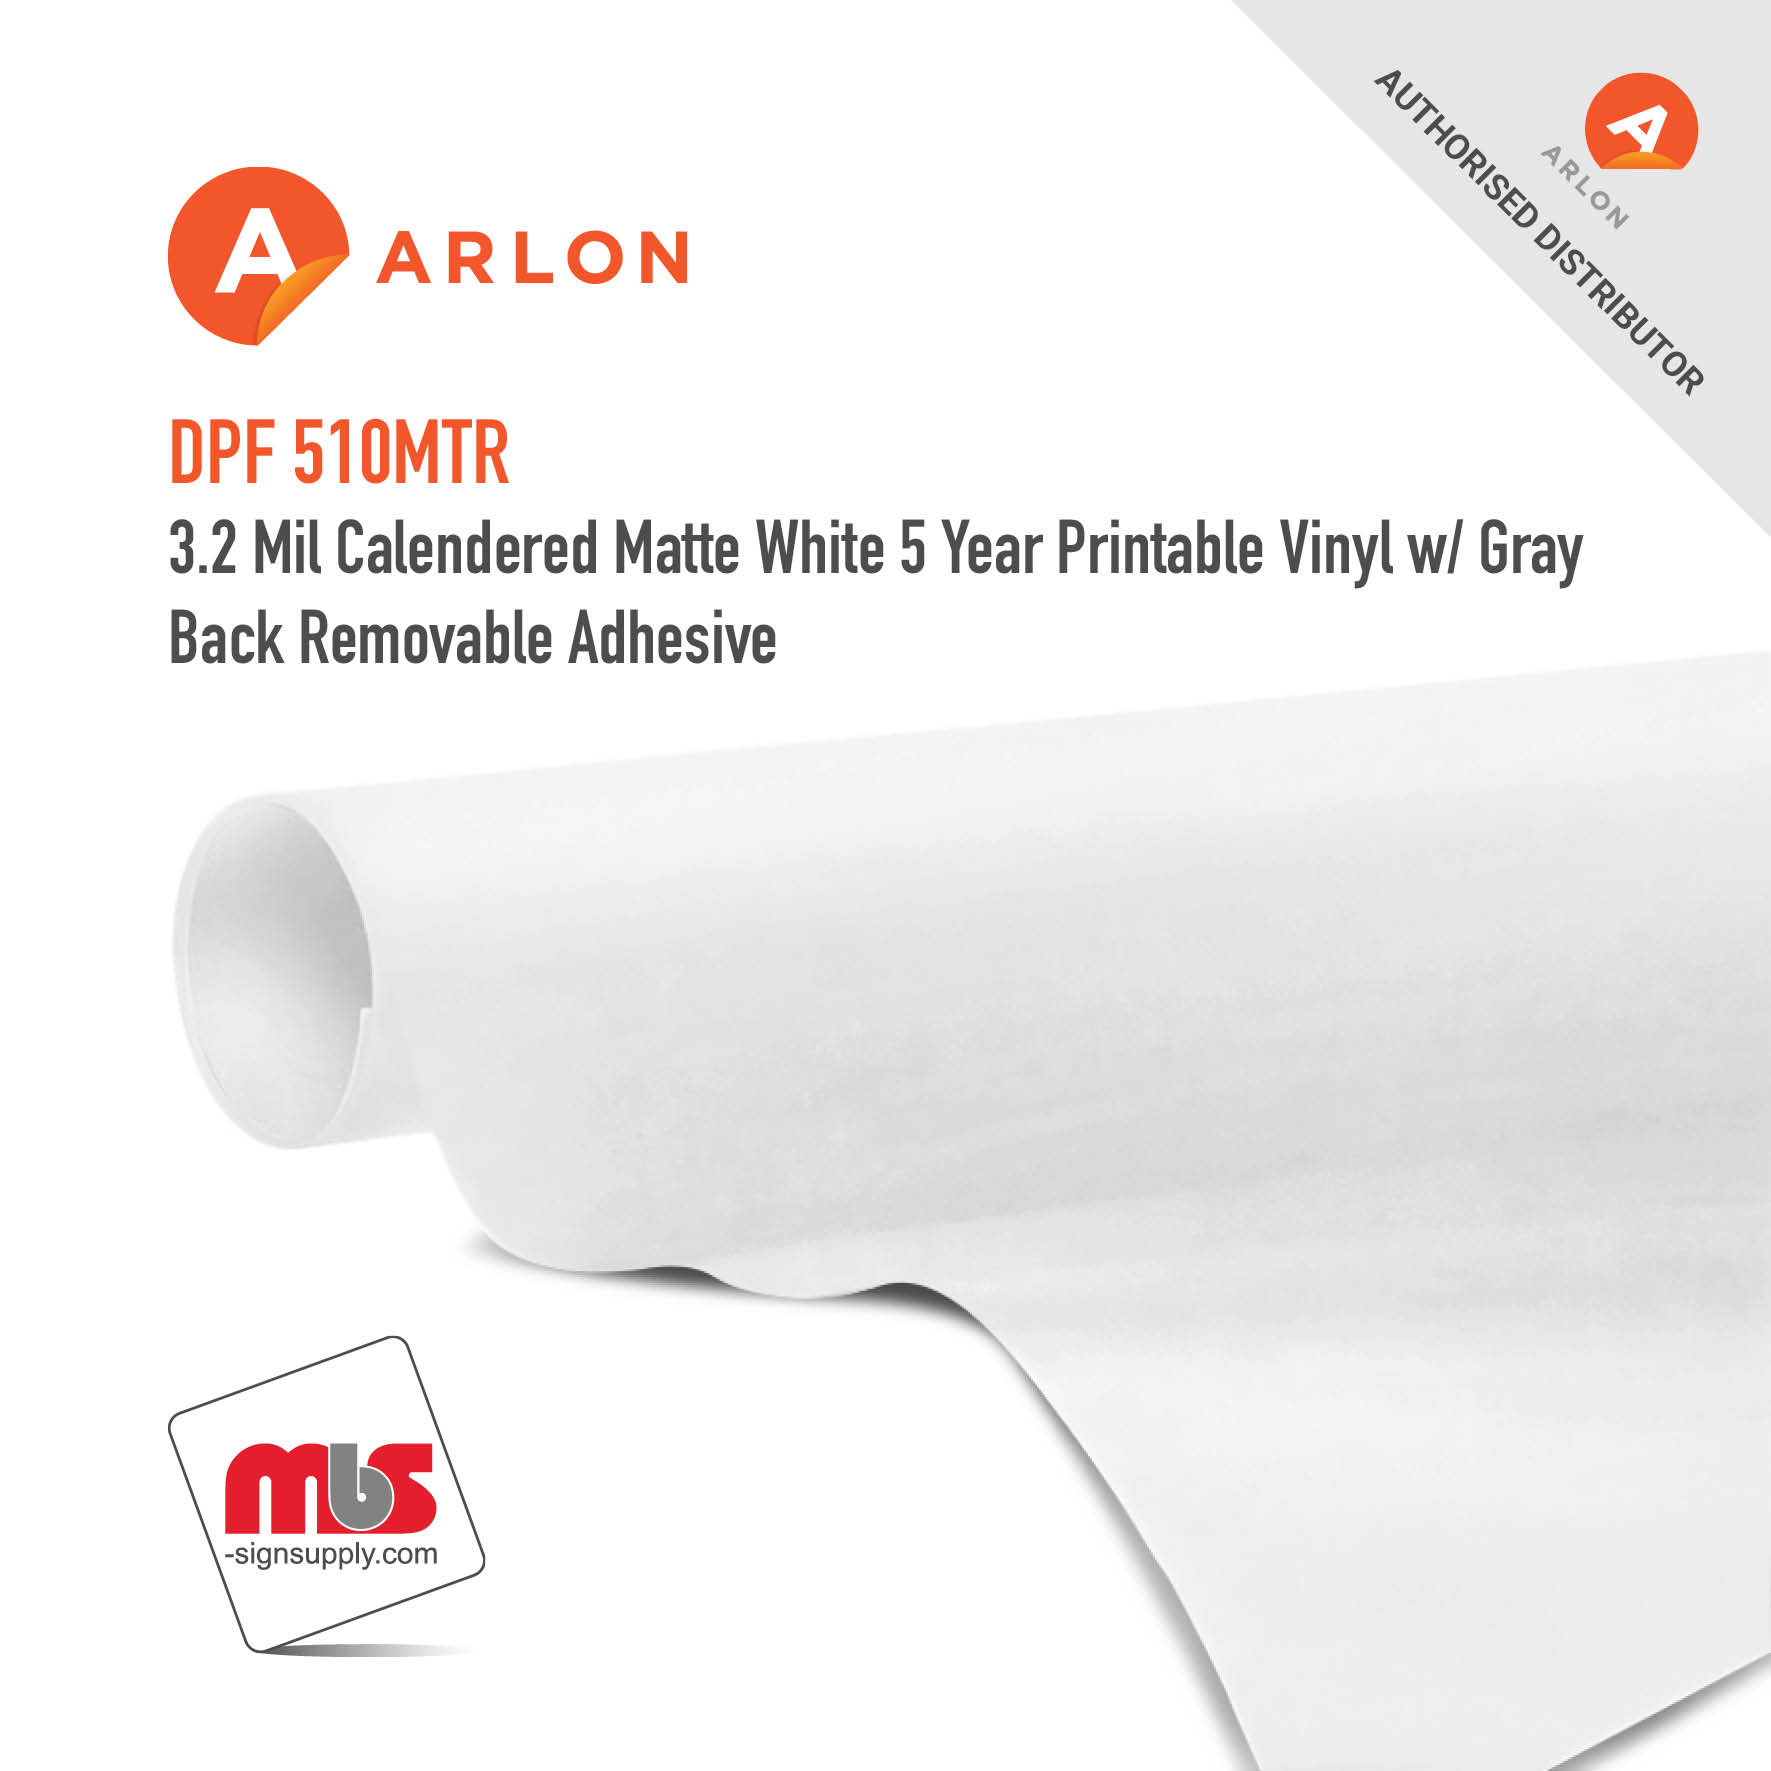 54'' x 50 Yard Roll - Arlon DPF 510MTR 3.2 Mil Calendered Matte White 5 Year Printable Vinyl w/ Gray Back Removable Adhesive